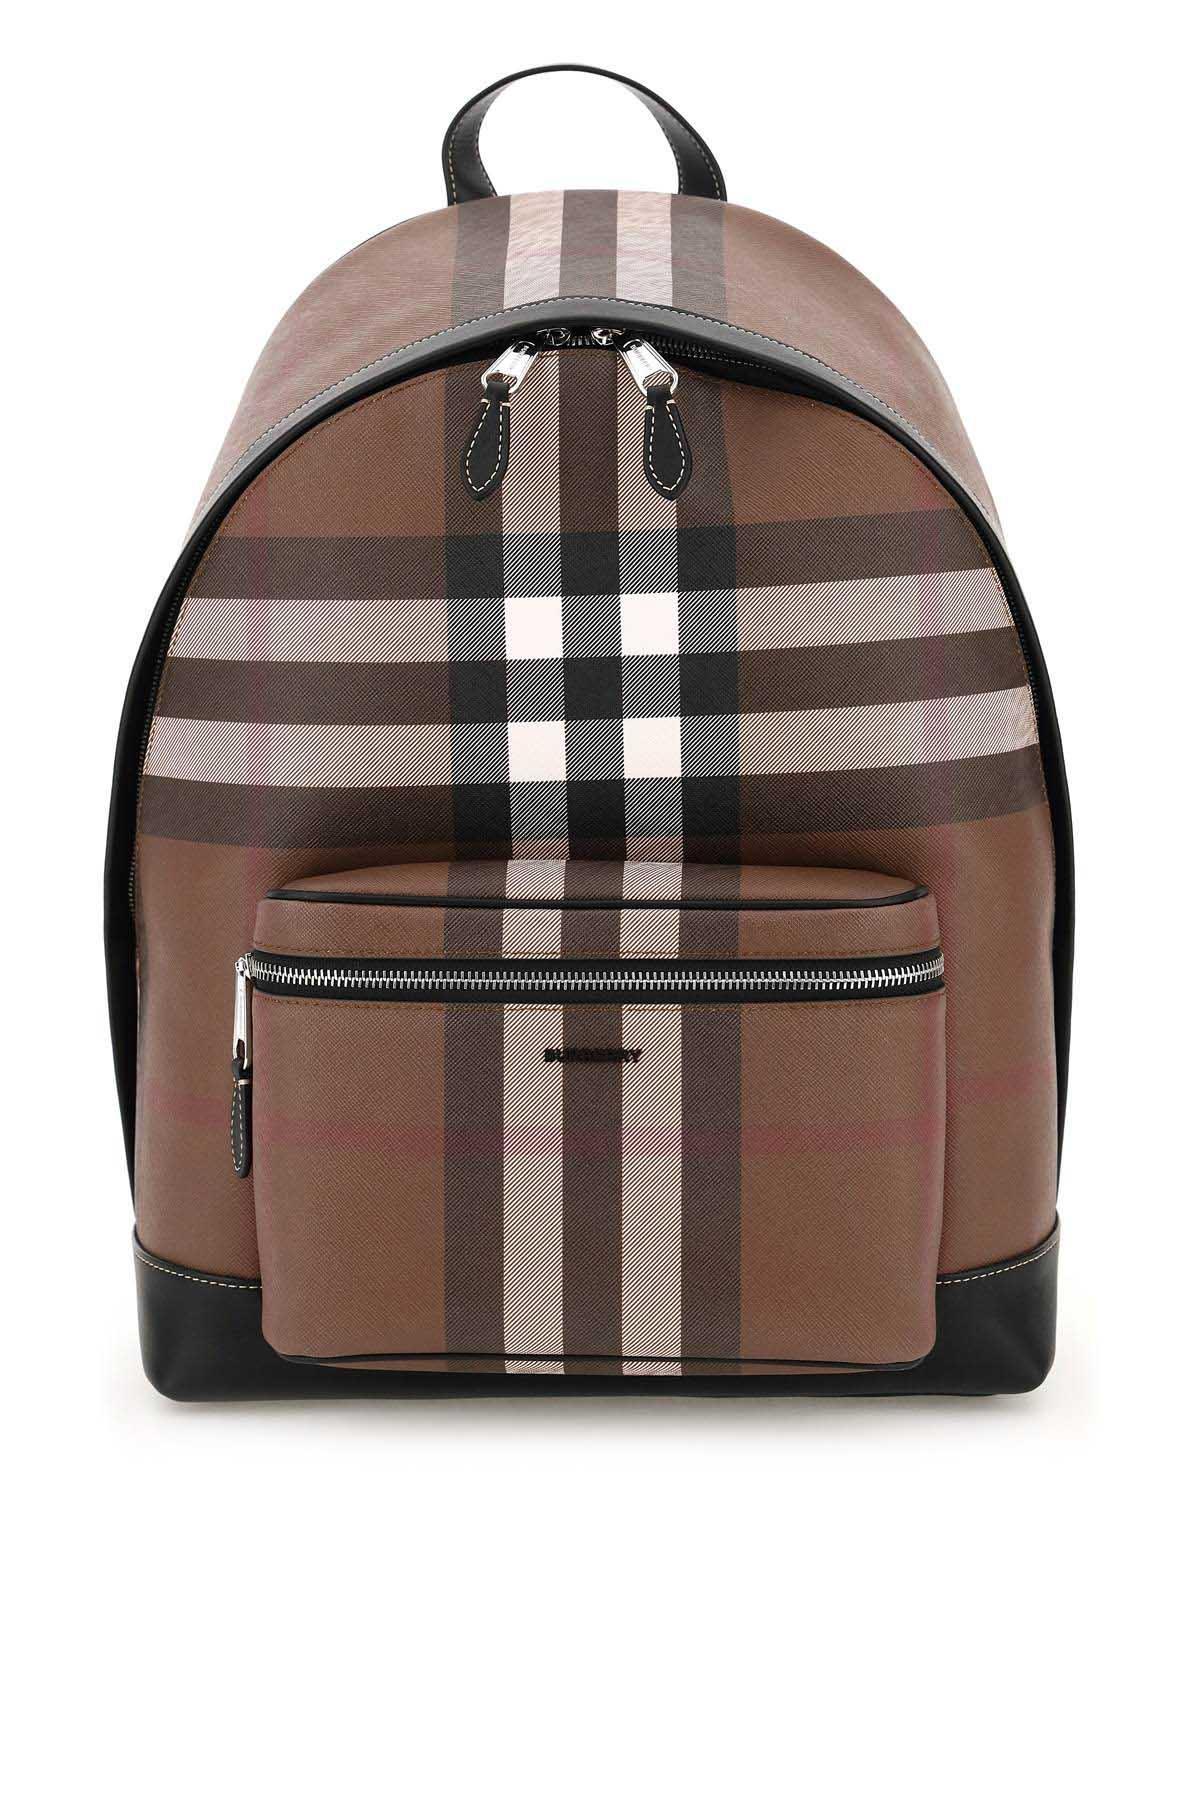 Burberry Check Coated Fabric Backpack in Brown for Men | Lyst